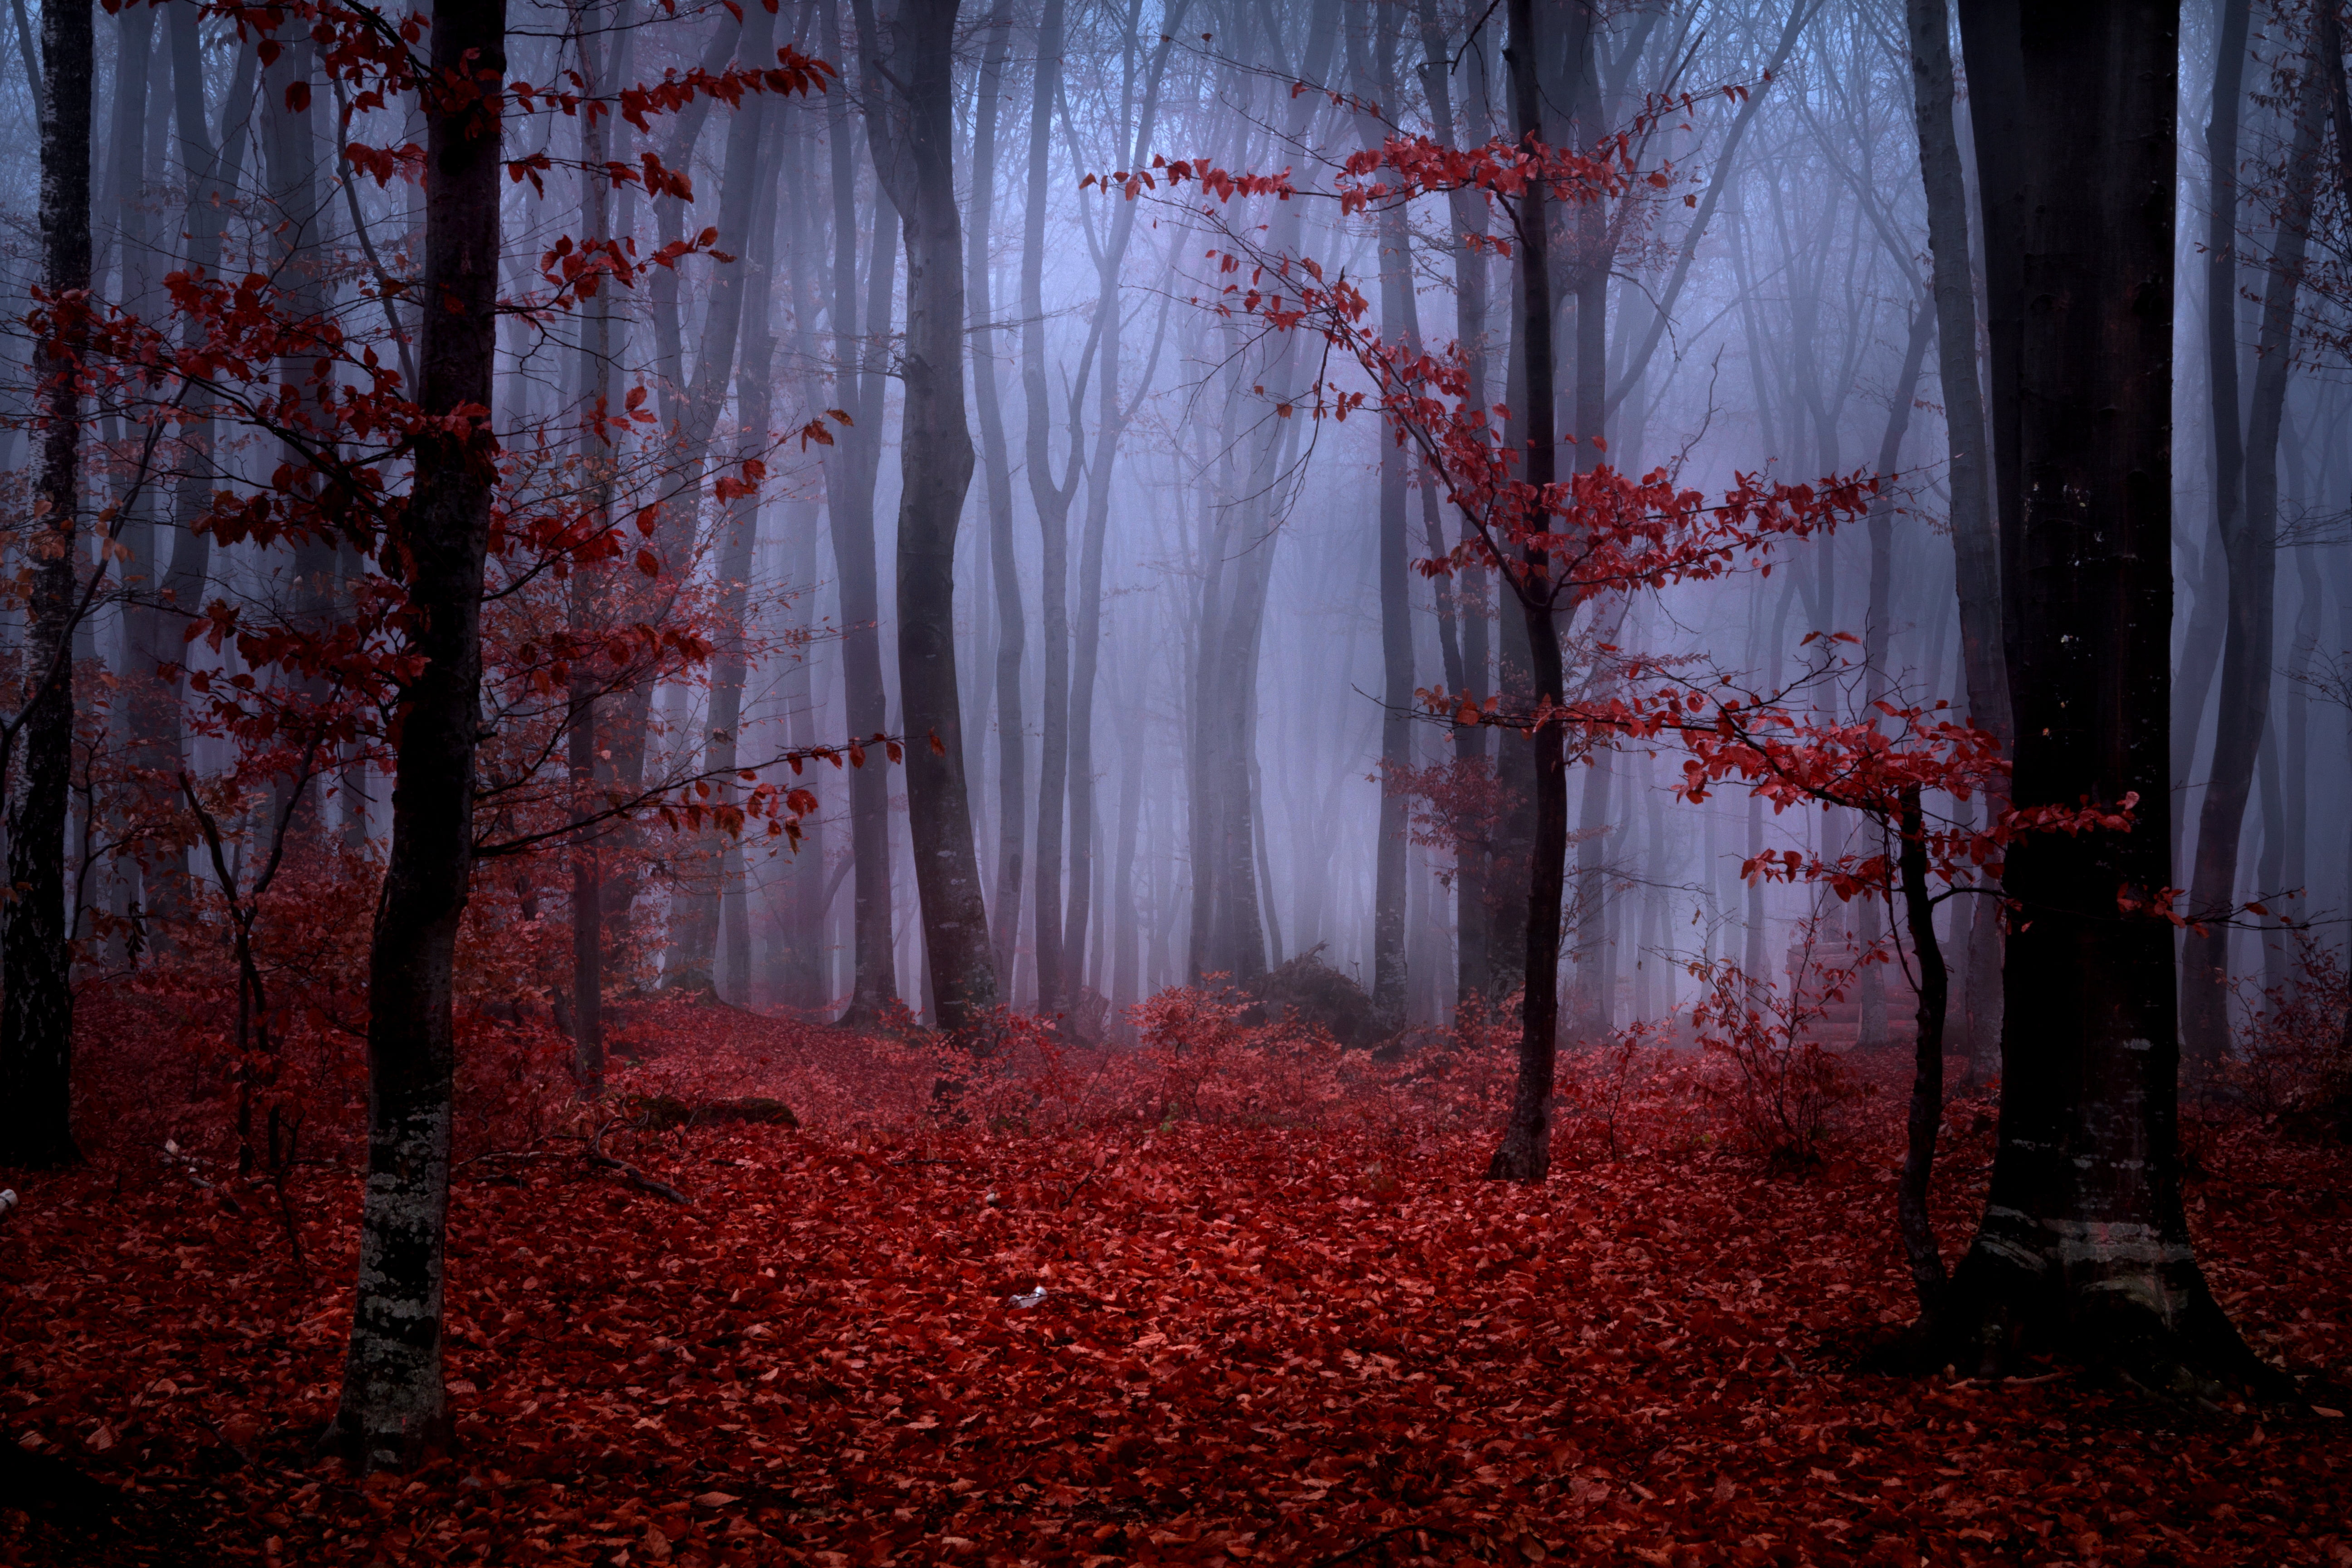 red leafed trees, autumn, forest, leaves, branches, nature, fog